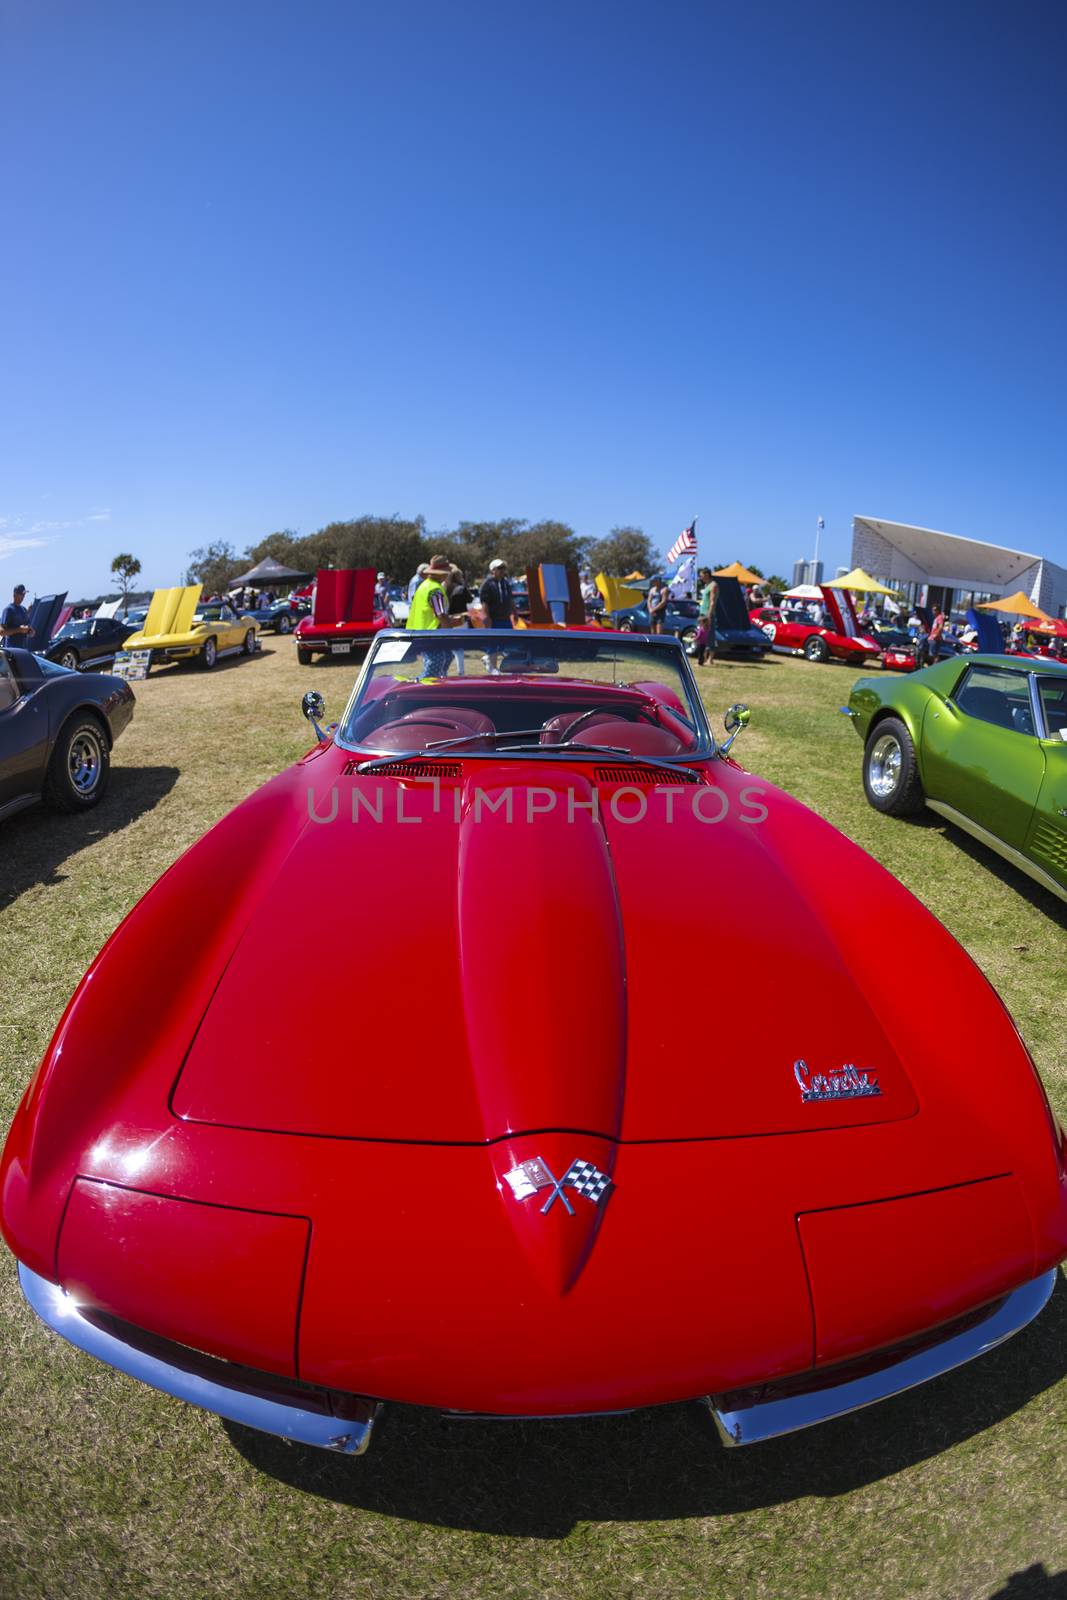 Gold Coast, QLD - SEPTEMBER 16: Chevy Corvettes and others on display at the Gold Coast "Corvettes on Display" classic car show at Gold Coast QLD , Australia September 16, 2013.